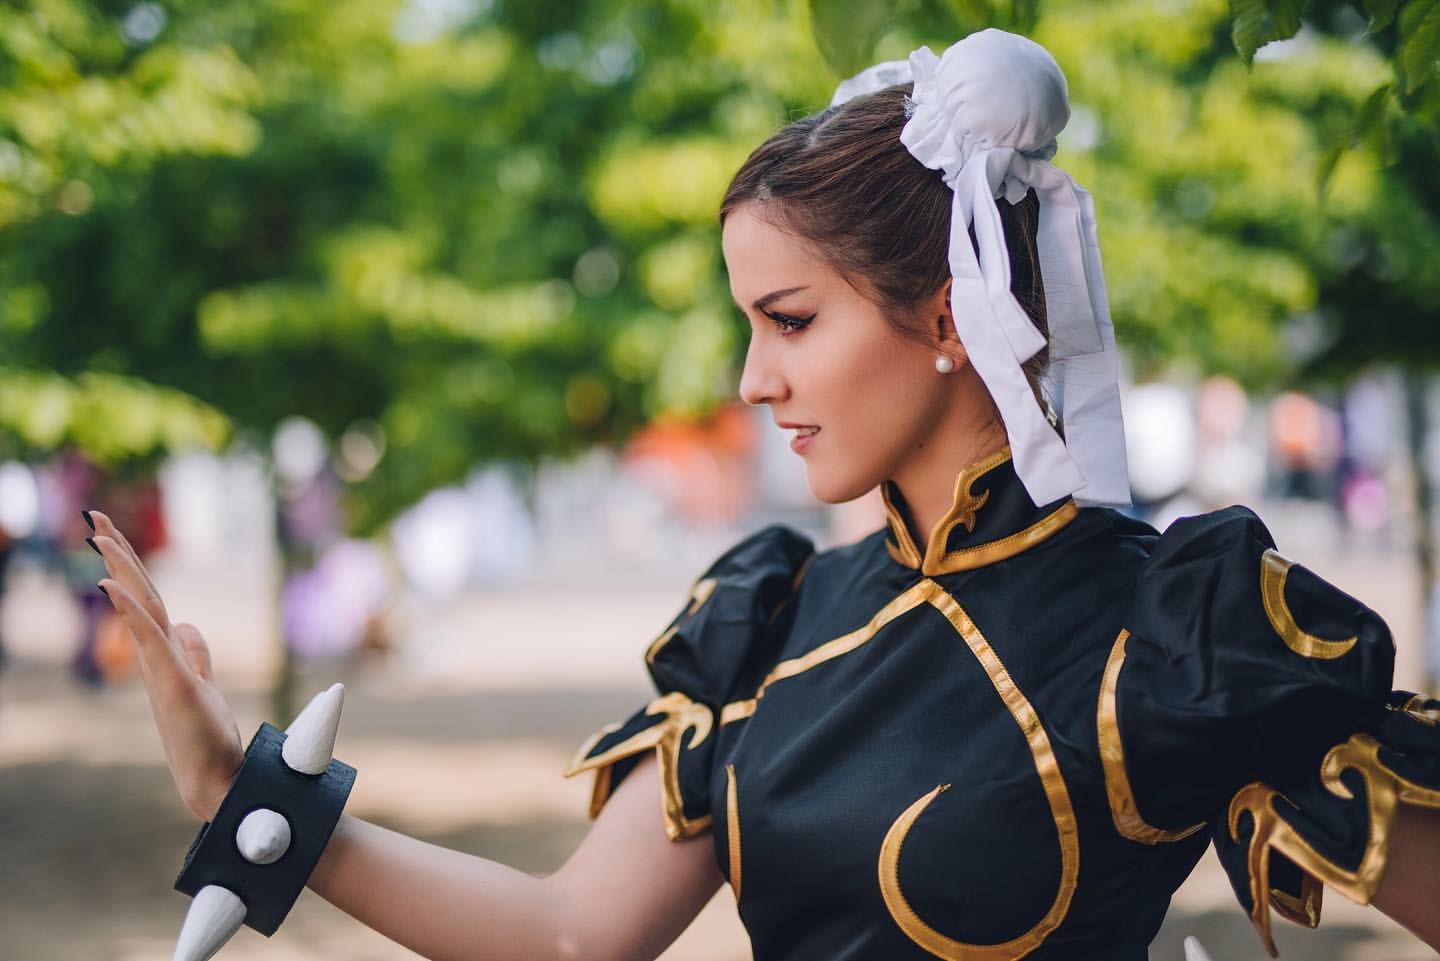 Street Fighter: 10 Chun-Li Cosplays That Look Just Like The Game